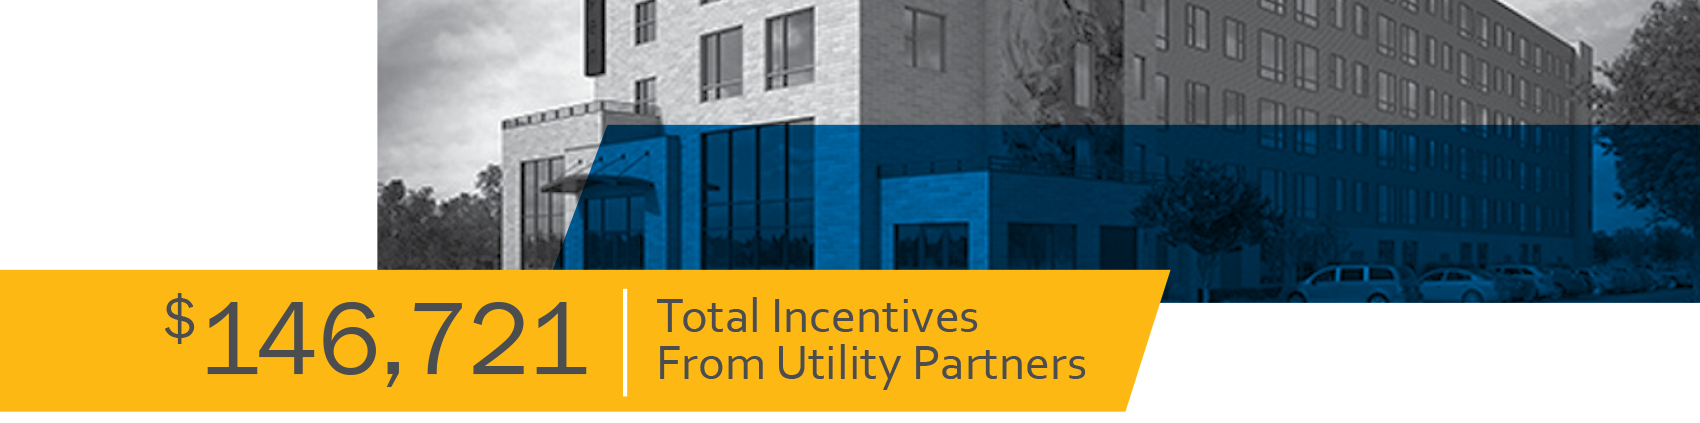 $146,721 Total Incentives From Utility Partners